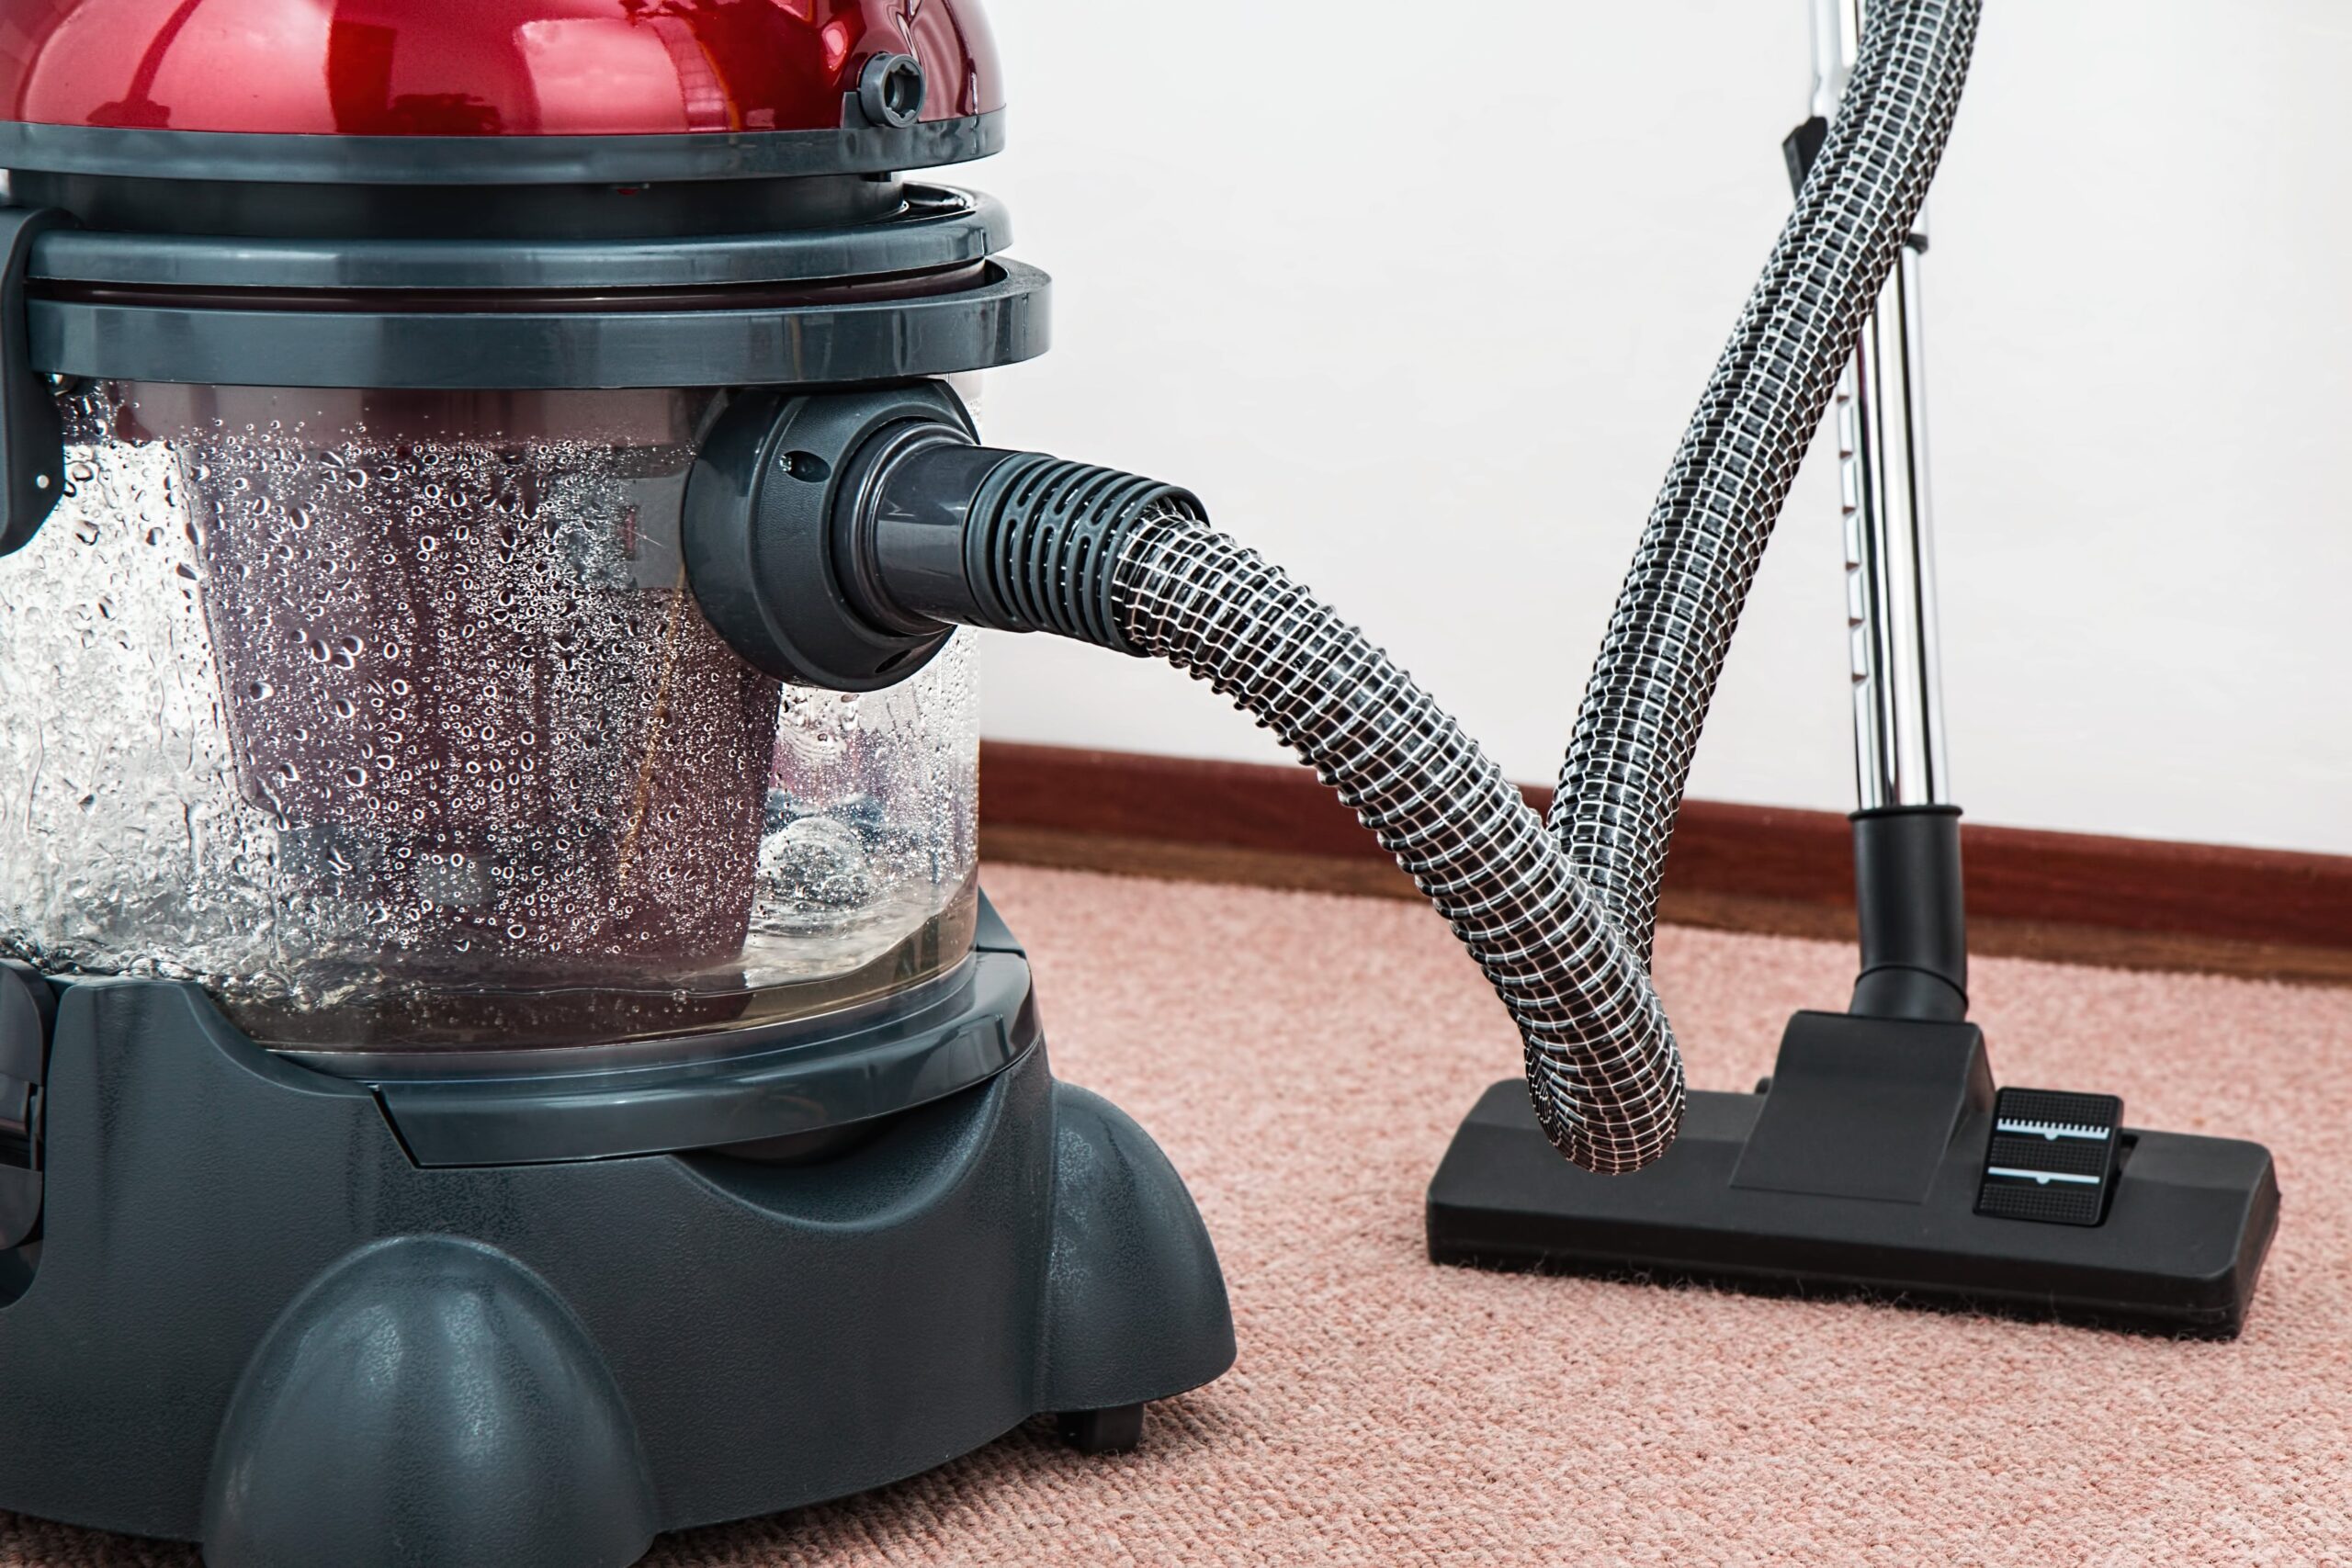 Top 10 Professional Carpet Cleaning Tips from a professional